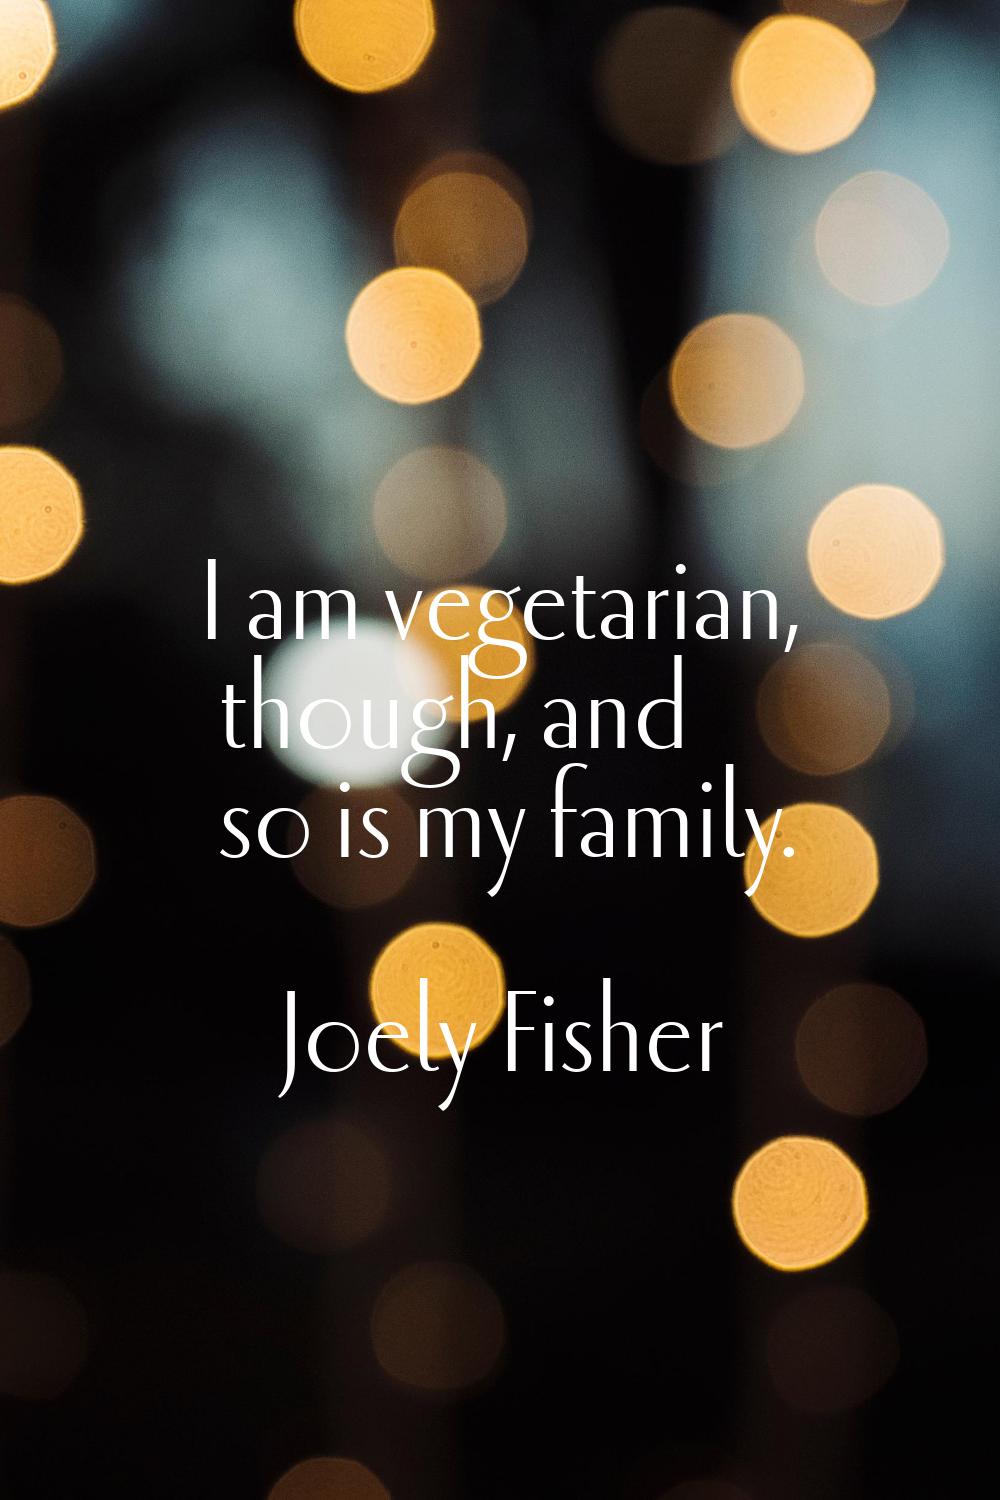 I am vegetarian, though, and so is my family.